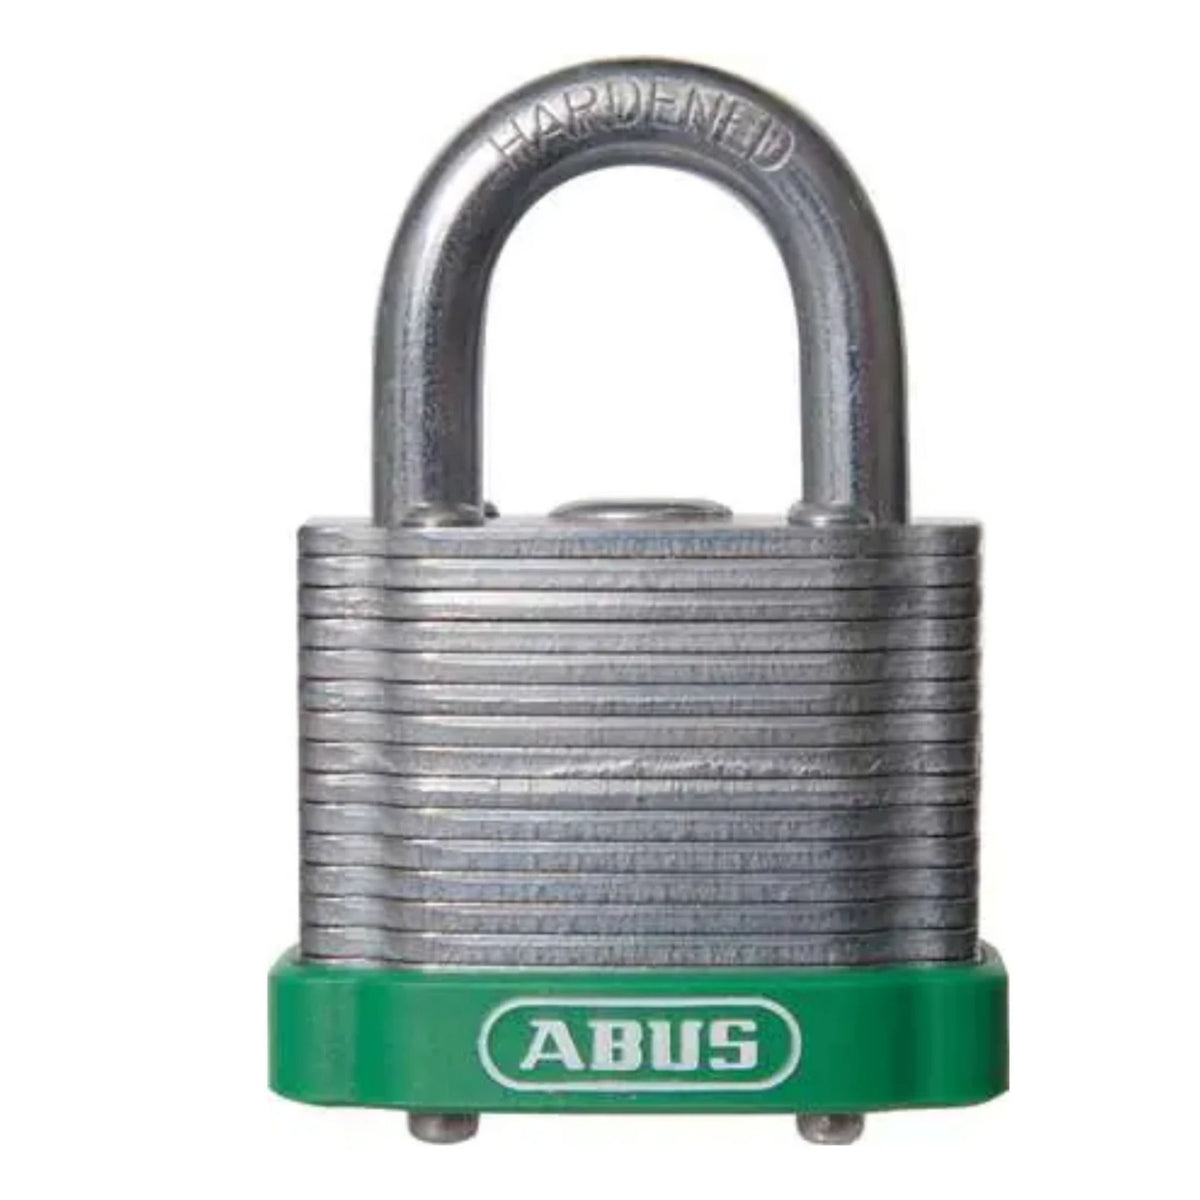 Abus 41/40 KD Laminated Steel Padlock with Green Bumper - The Lock Source